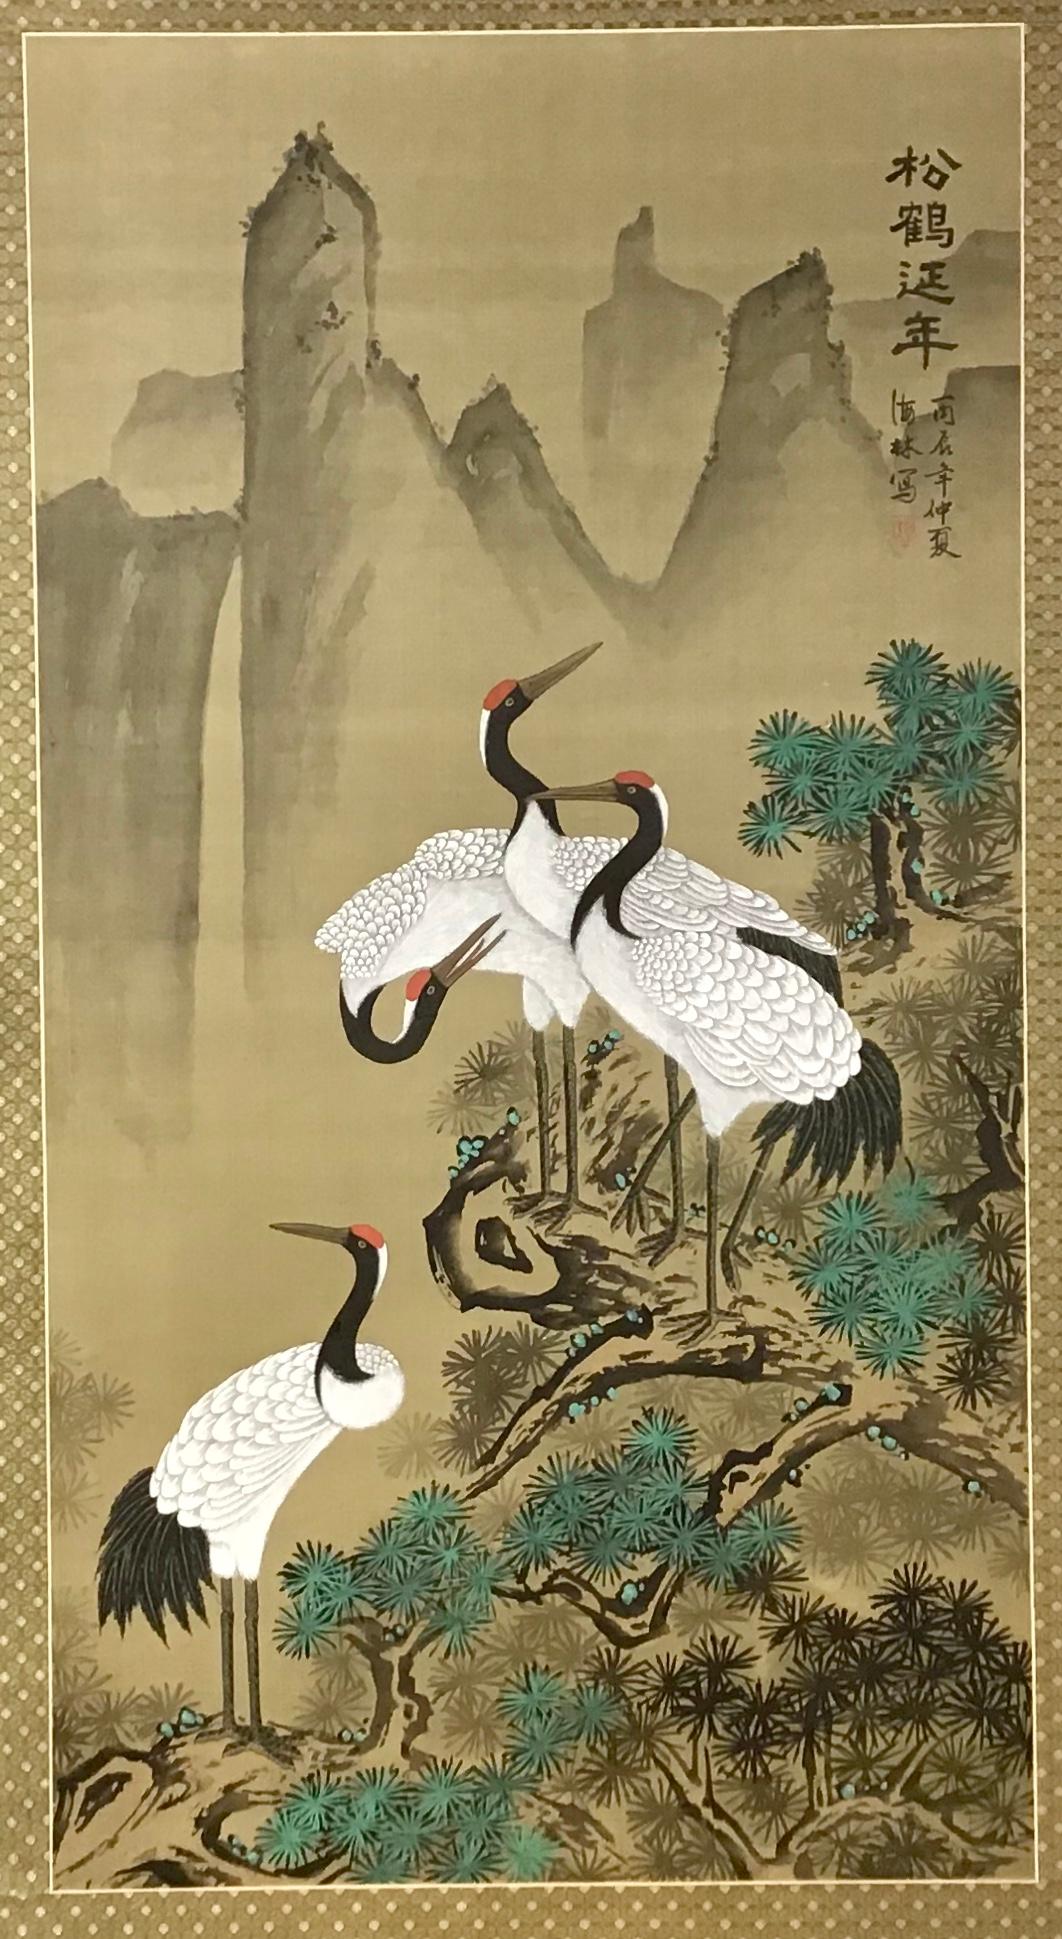 A striking large painting on silk mounted on board of four colorfully painted cranes set against a naturalistic background of mountains and foliage. Black Chinese characters vertically painted on the upper right. Lacquered frame with corners carved